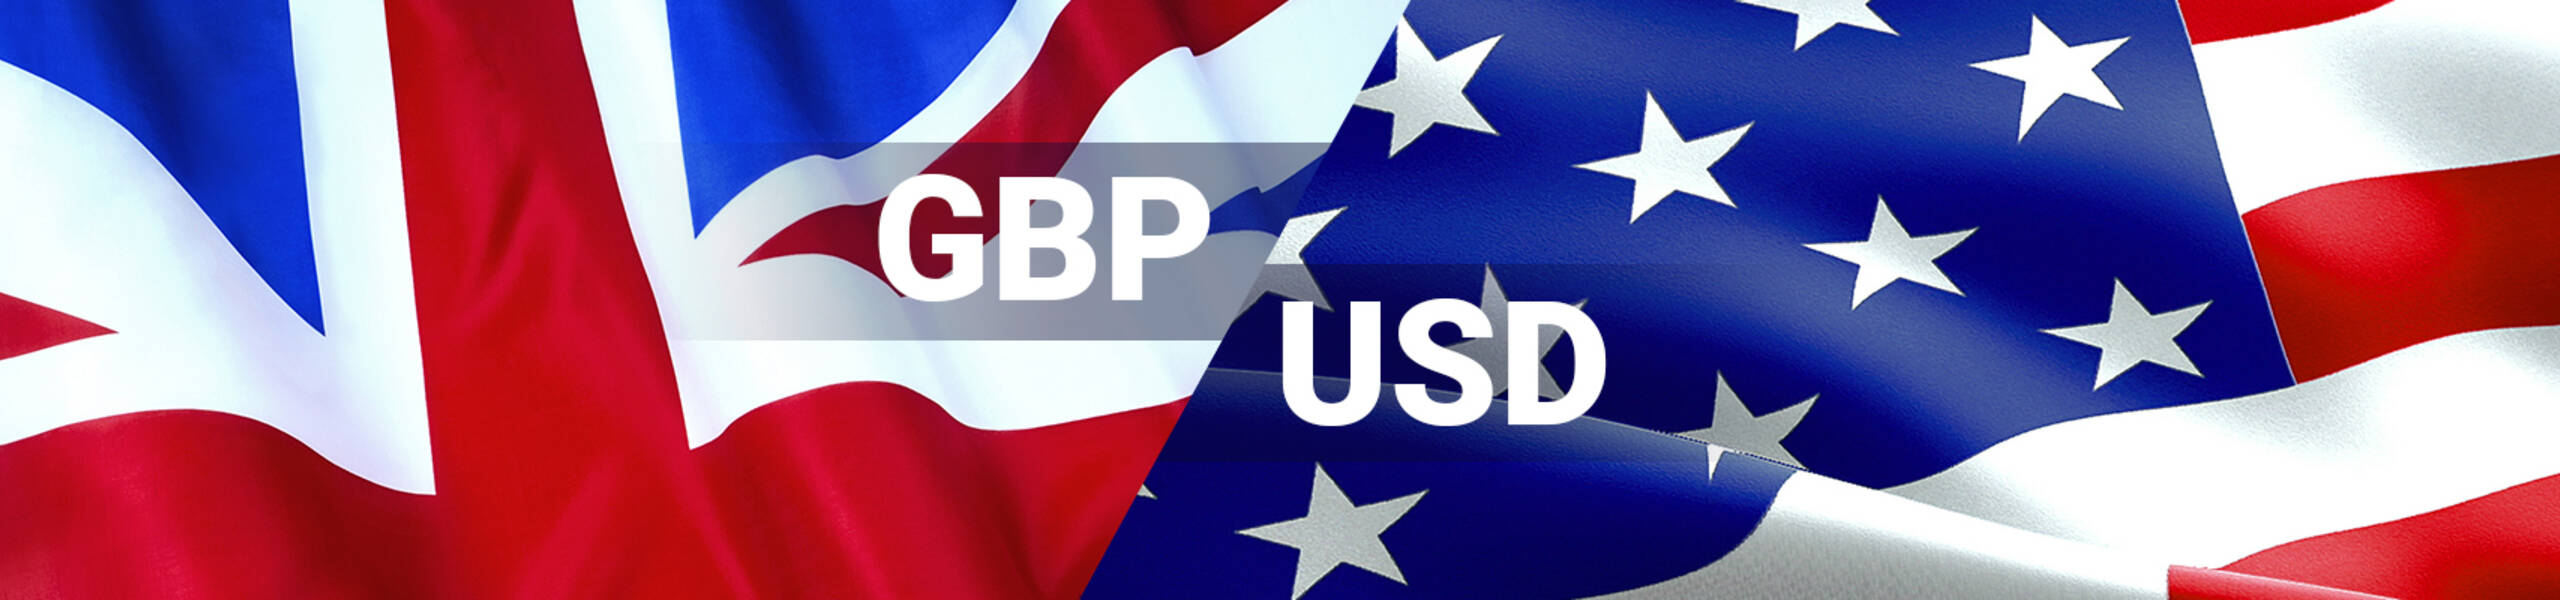 GBP/USD: pound can’t breaking SSB’s resistance